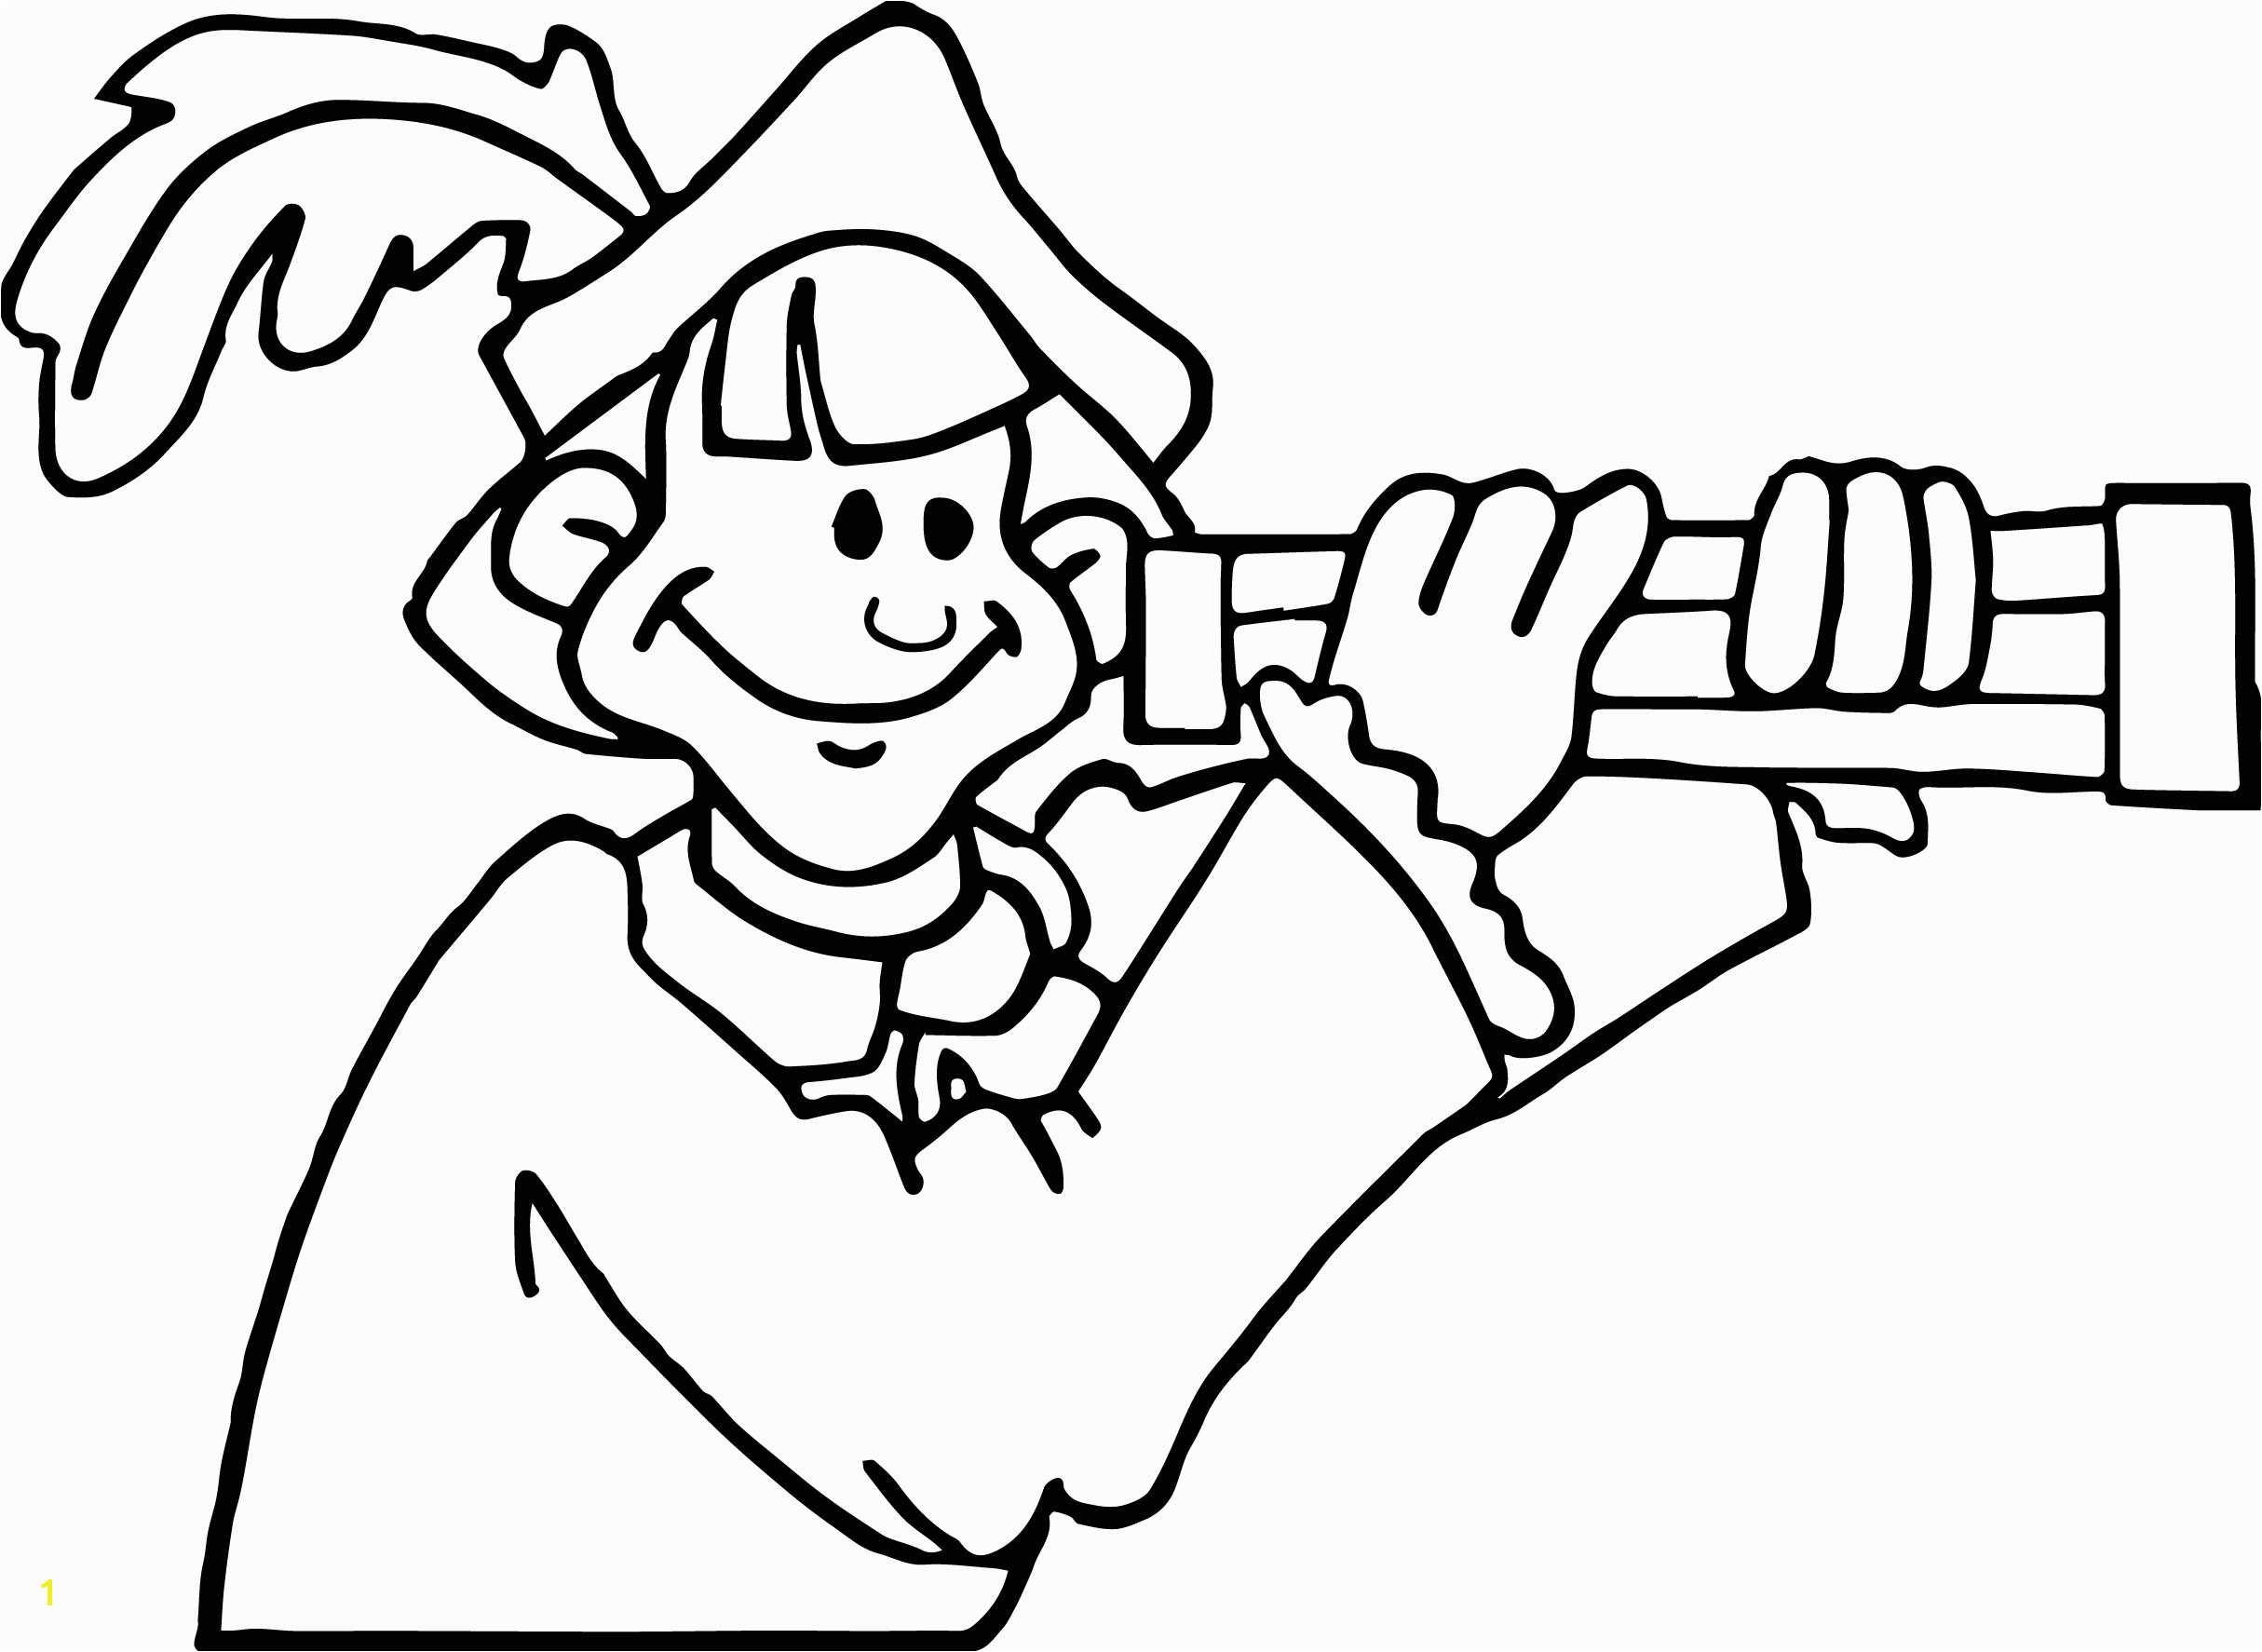 Christopher Columbus Coloring Pages Christopher Columbus Coloring Pages to and Print for Free Download